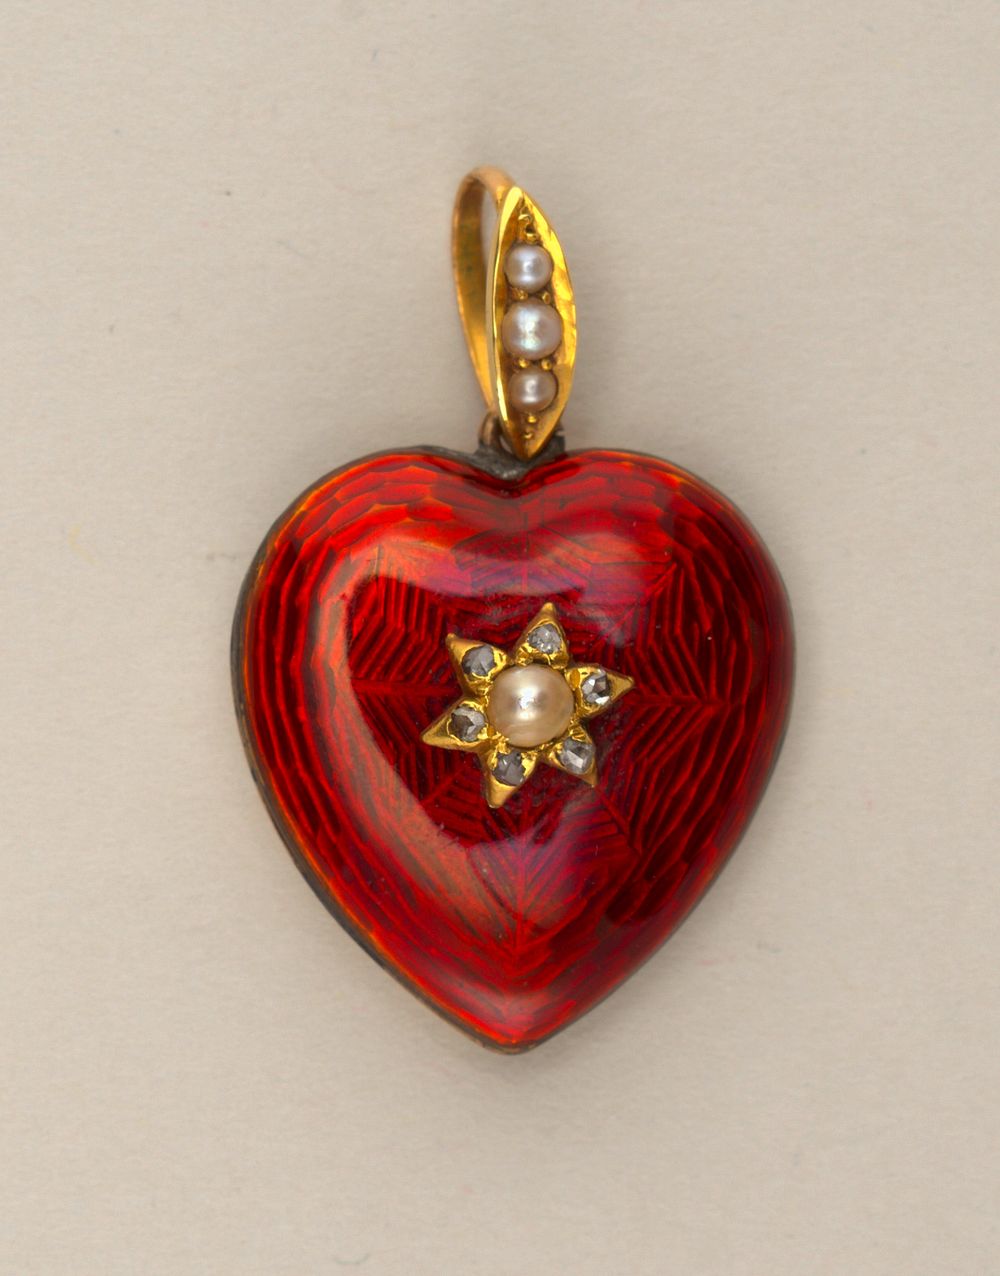 Locket in the form of a heart